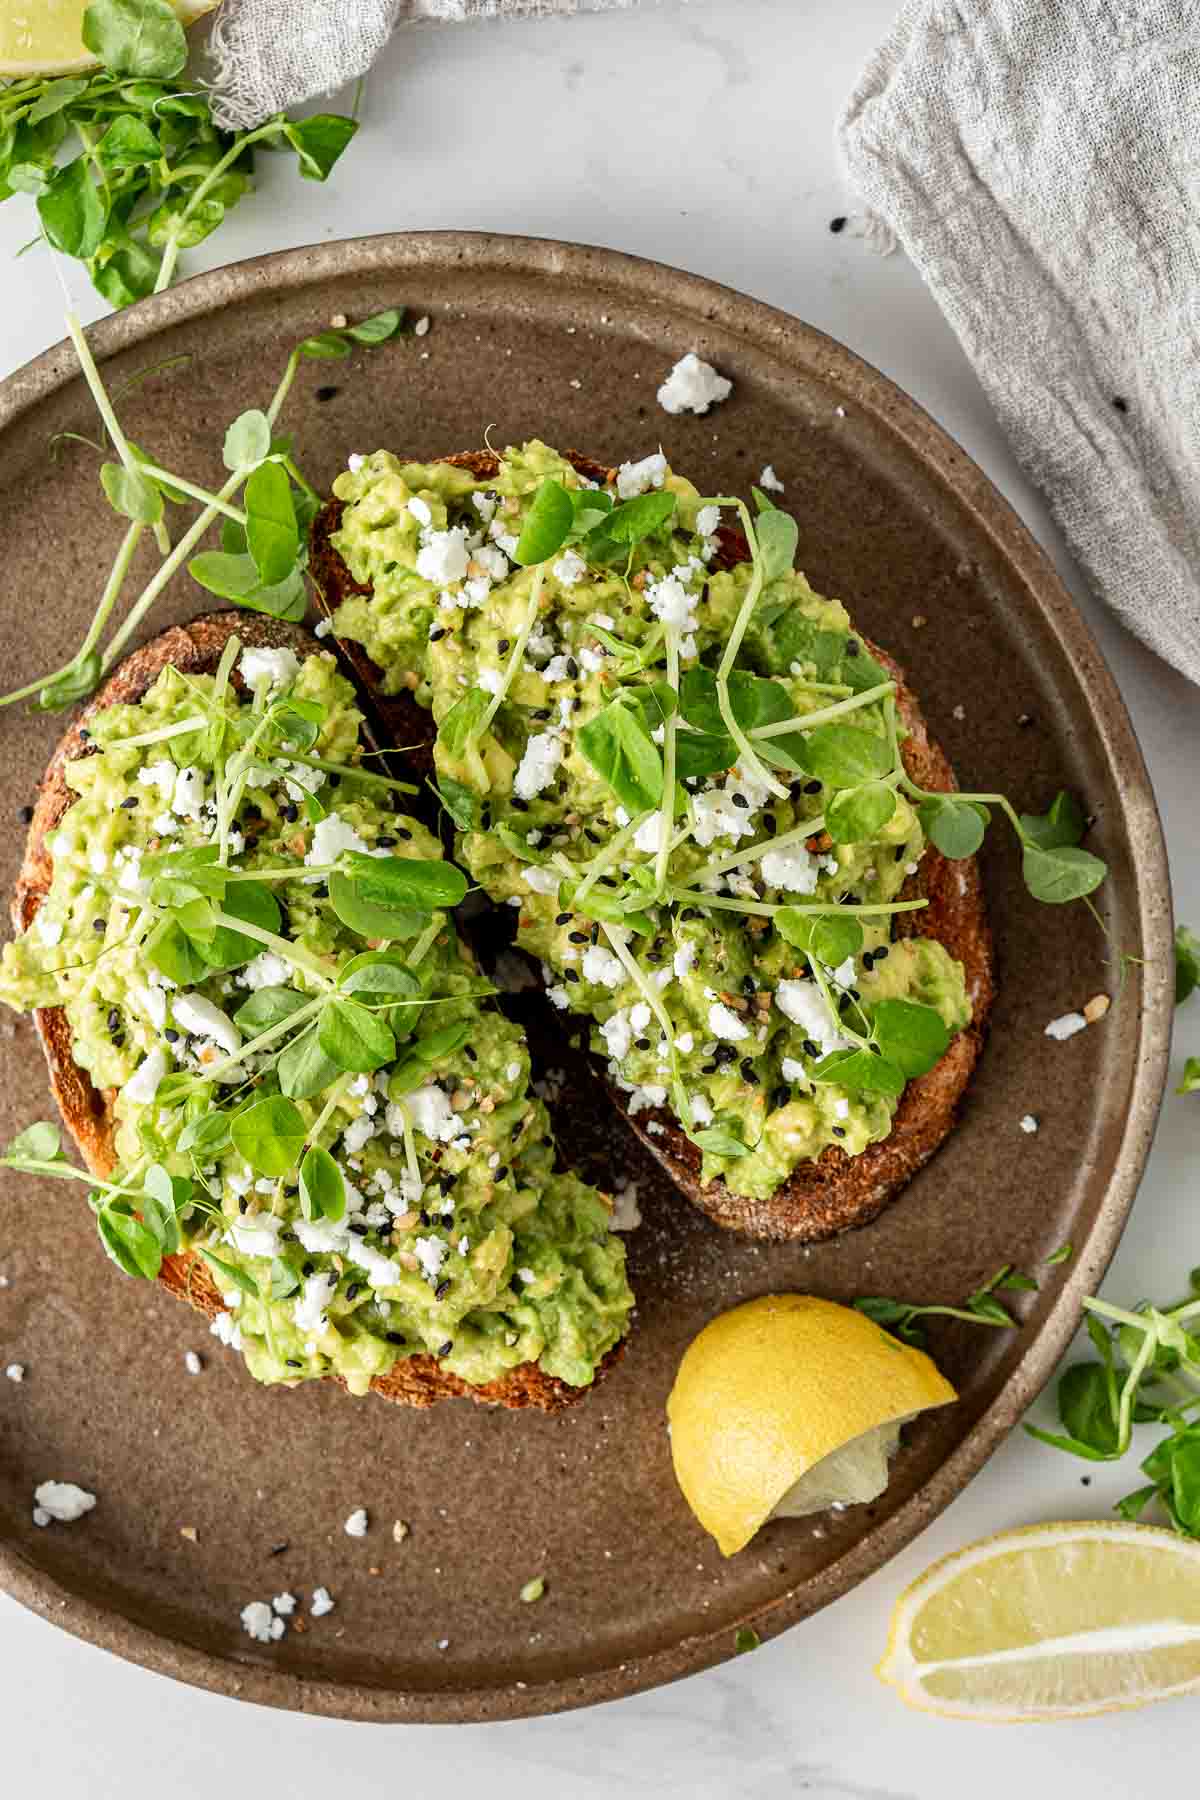 Avocado on toast on a brown plate with sprouts and everything bagel seasoning.